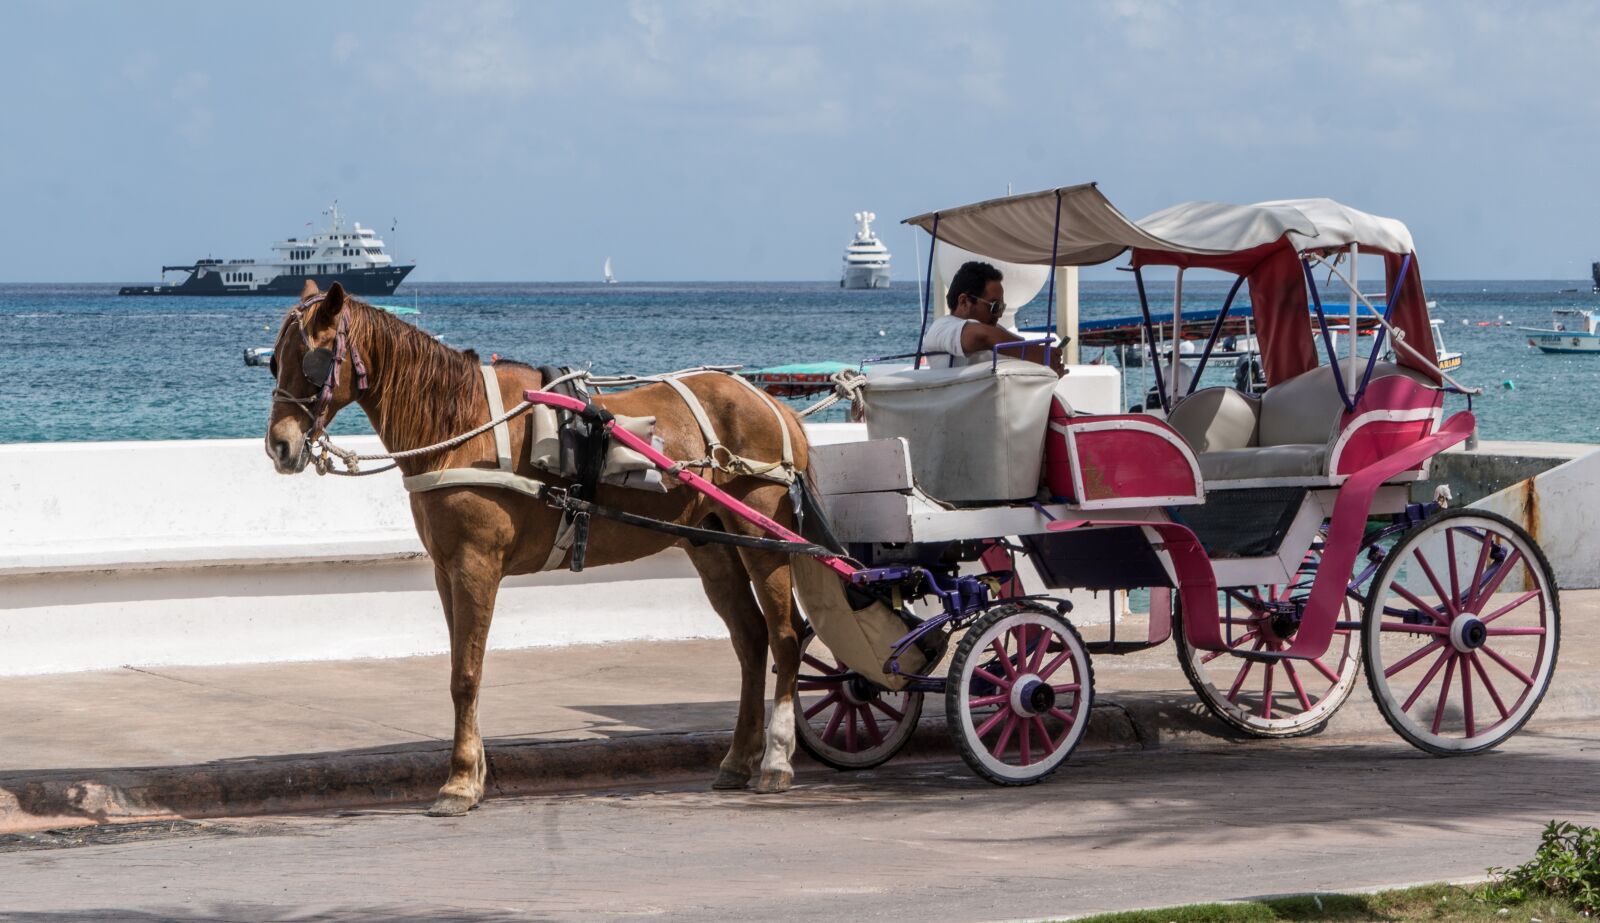 Sony a7R II sample photo. Horse, seaside, ocean view photography